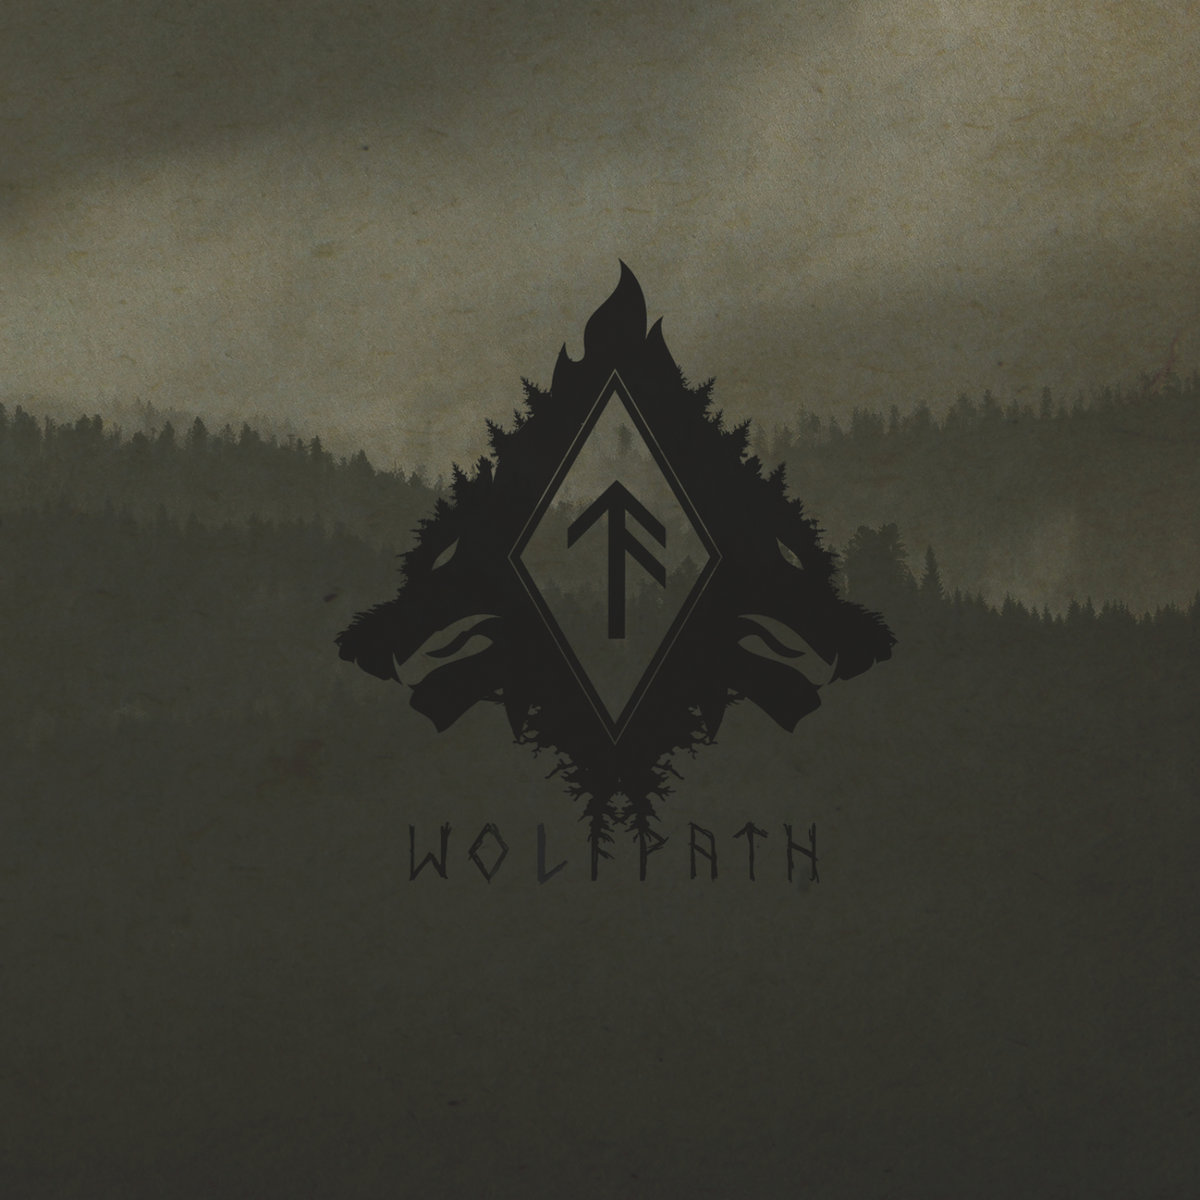 Wolfpath - "Wolfpath" EP - 2023